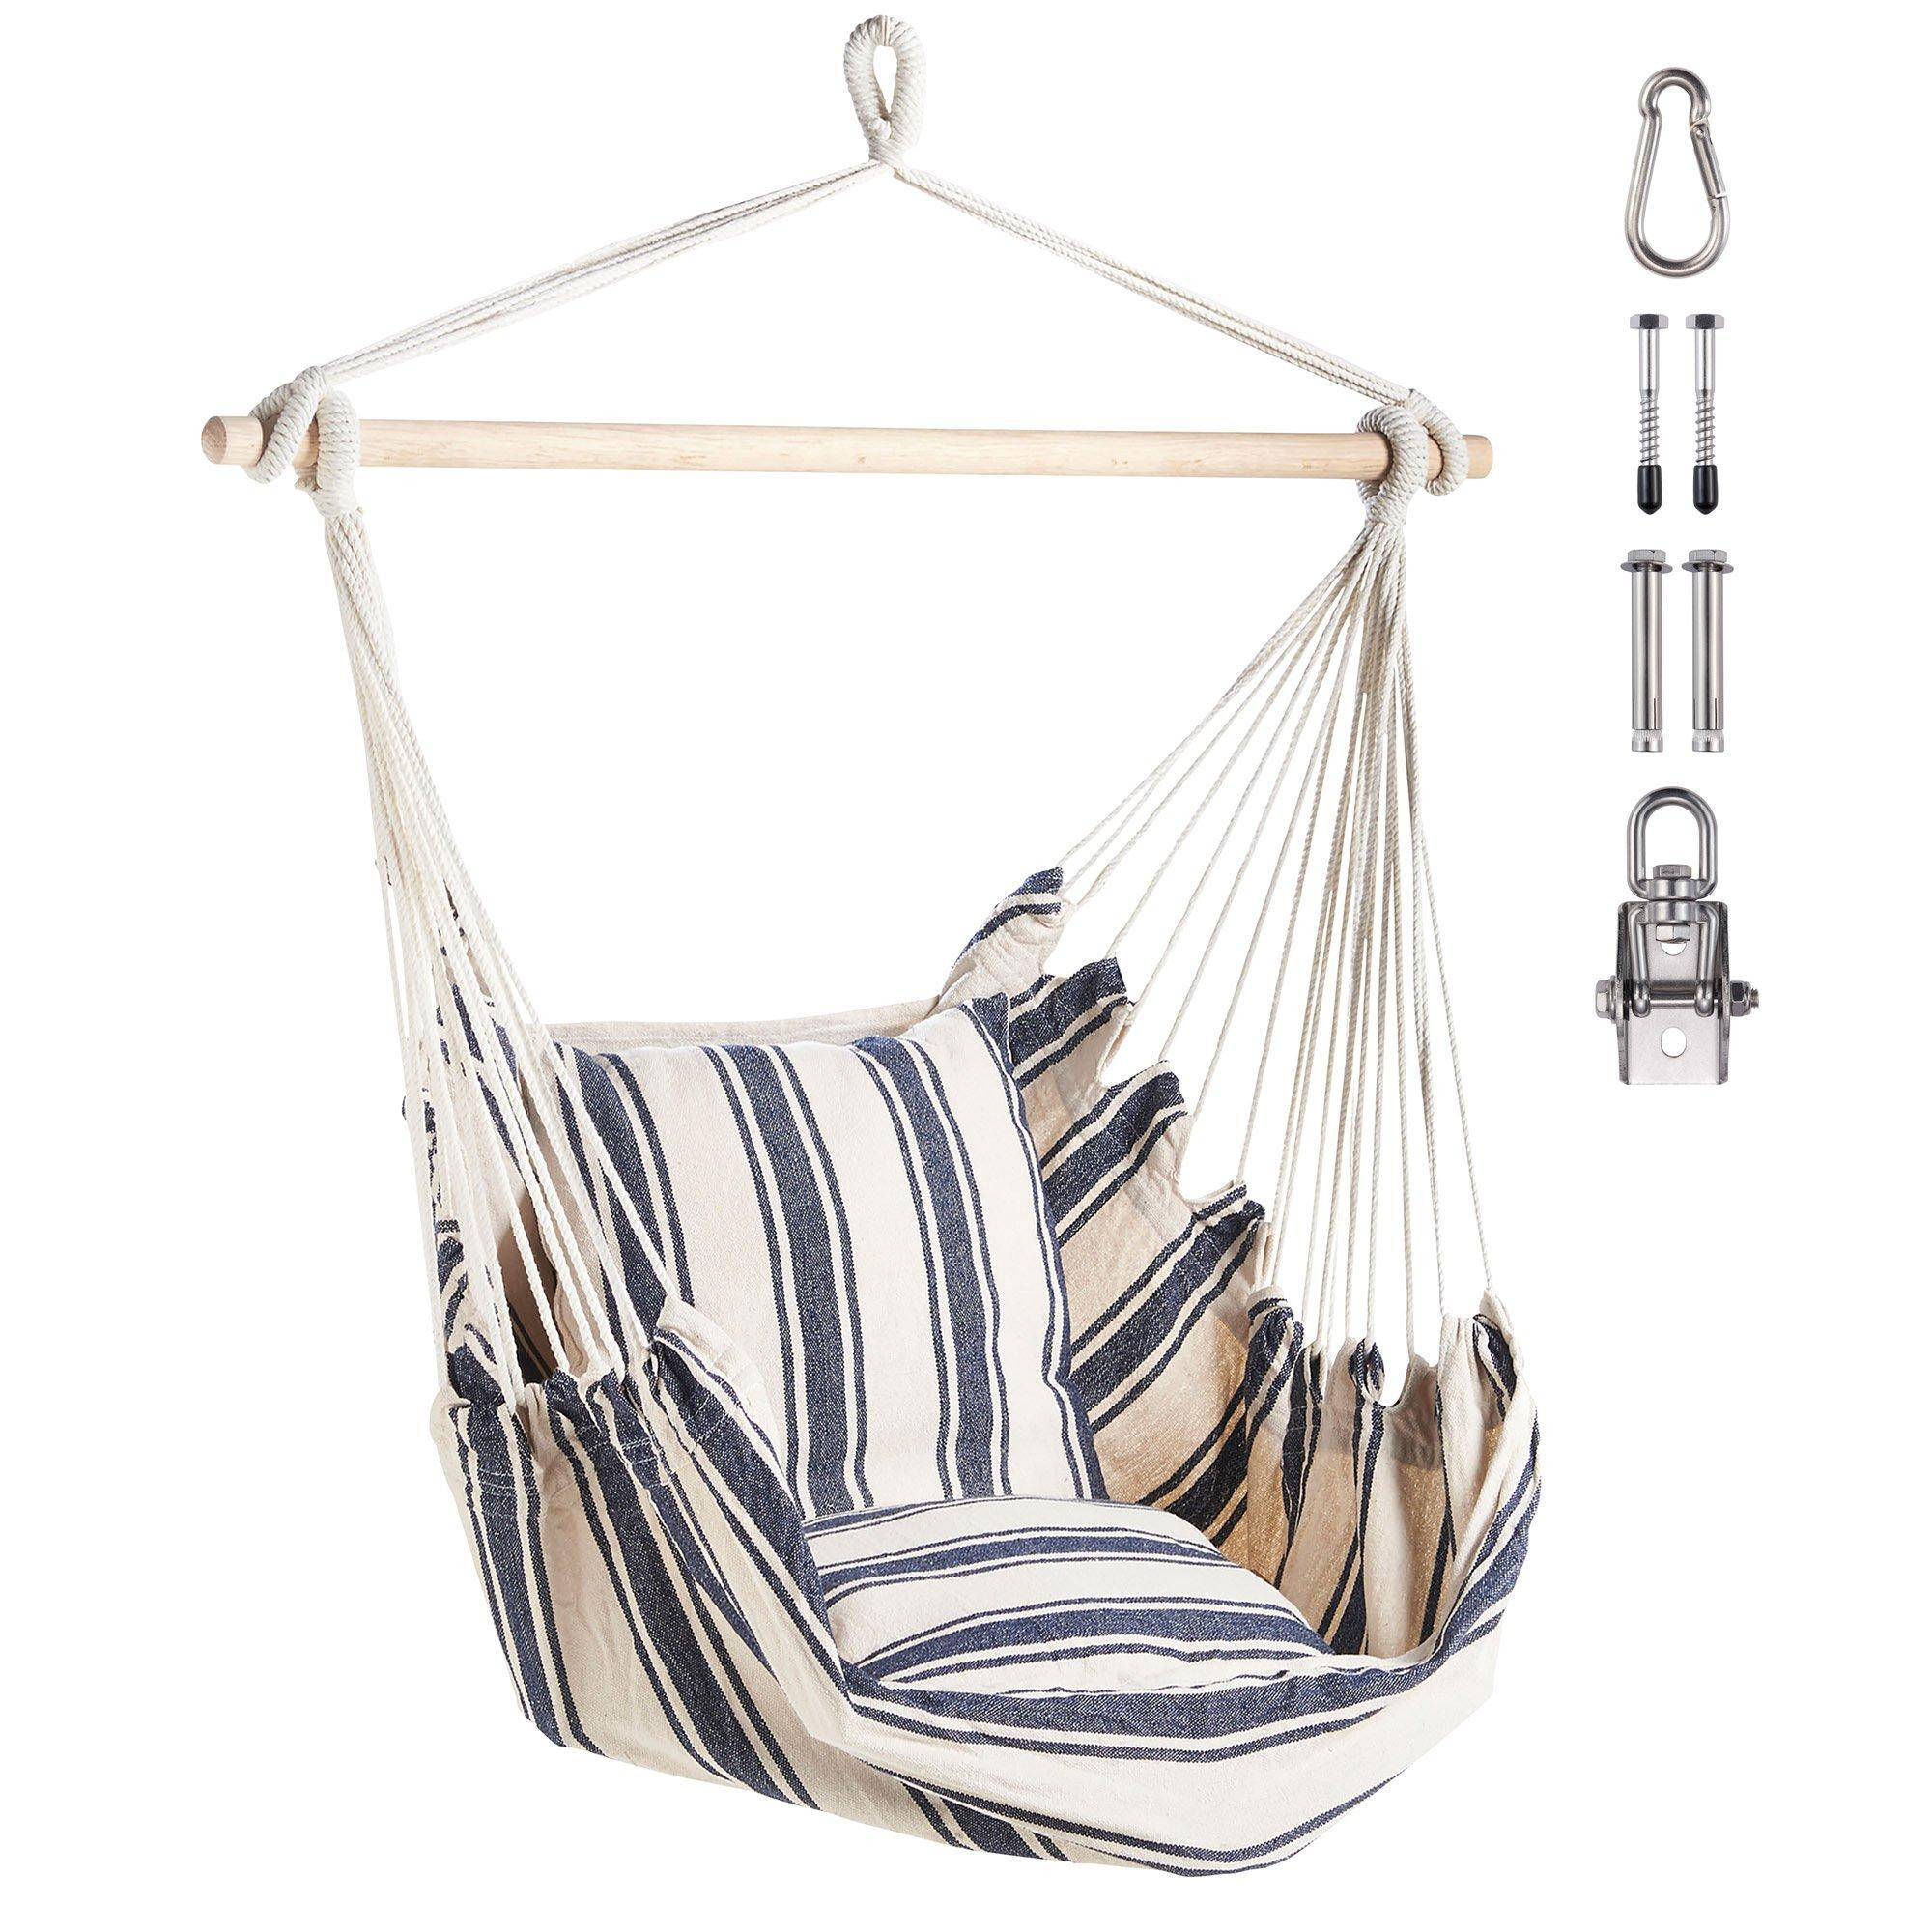 Outdoor Garden Hanging Chair with Attachments - image 1